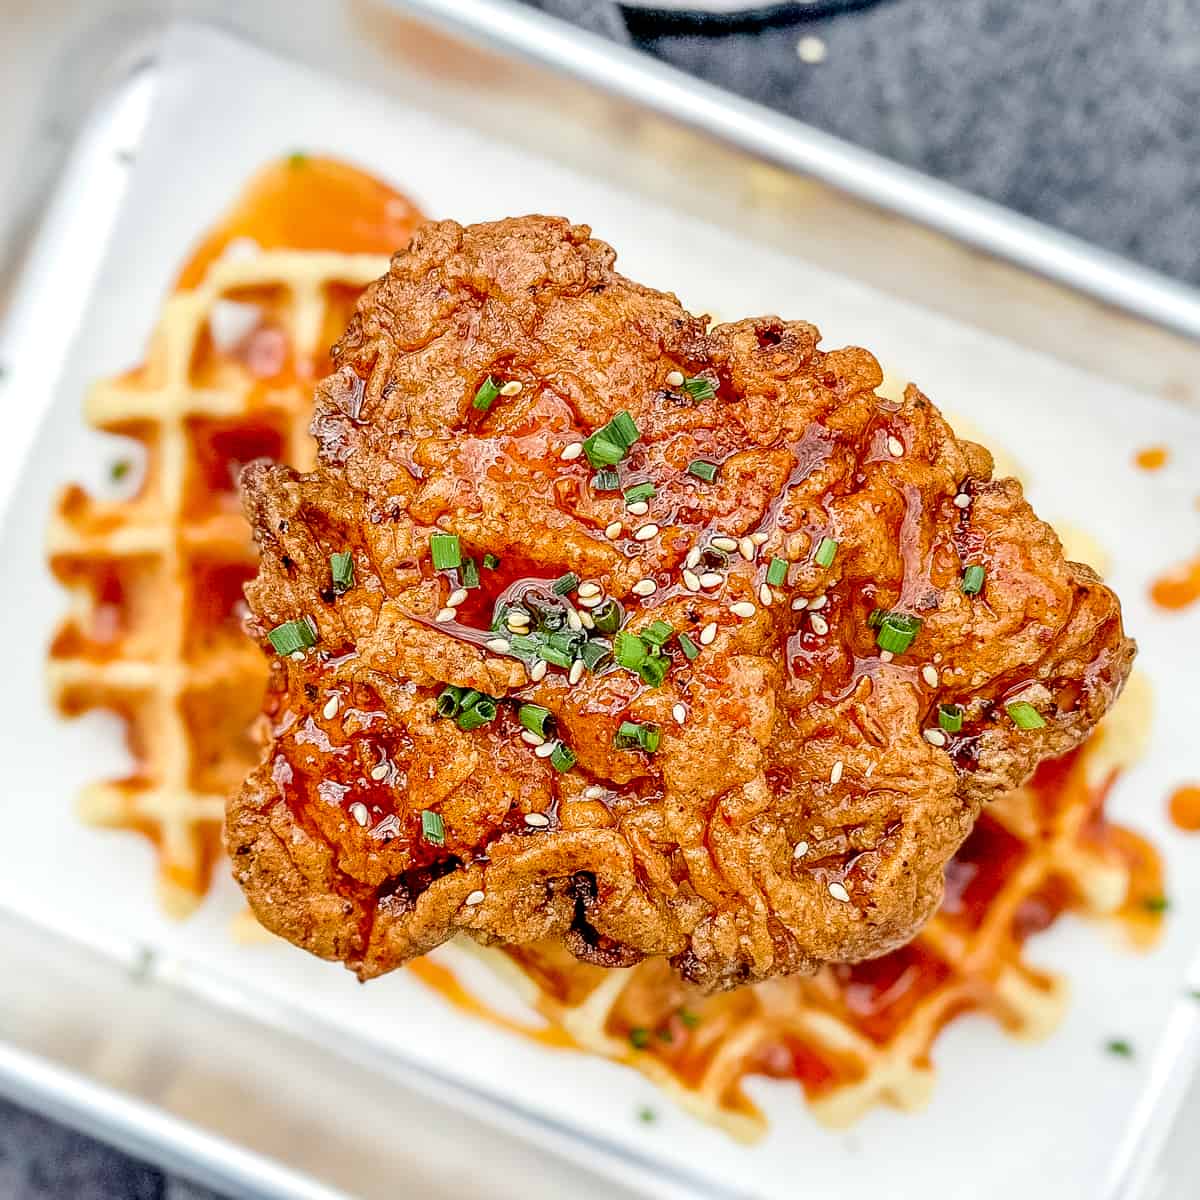 Korean Fried Chicken and Waffles - But First We Brunch!